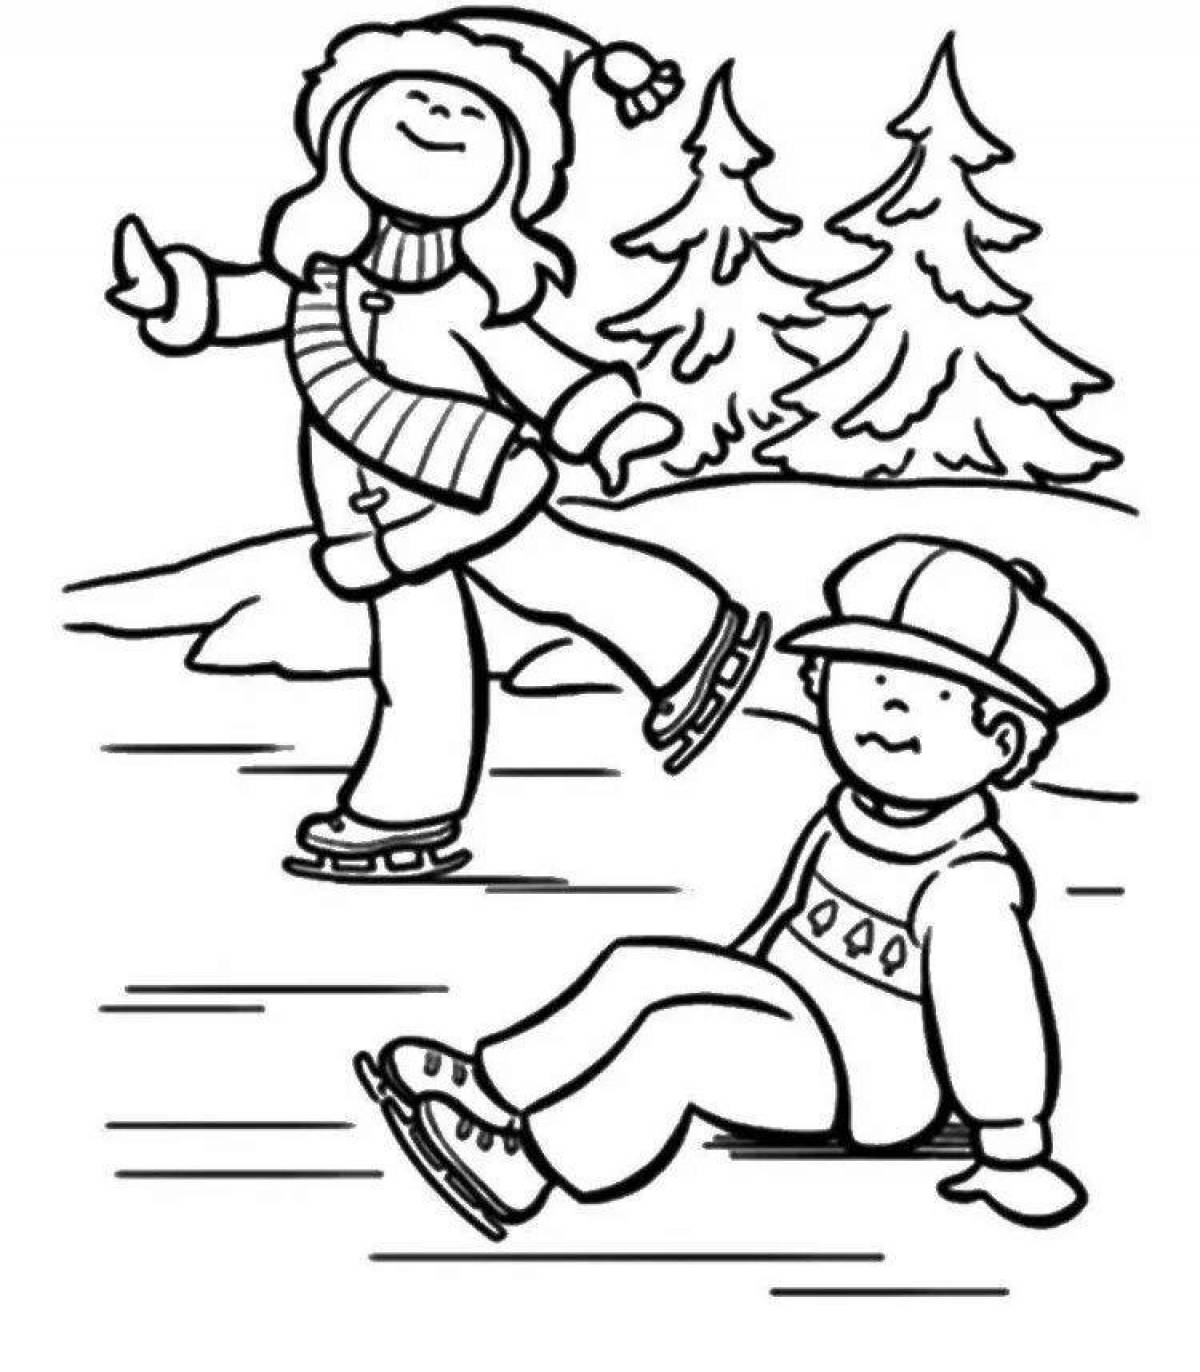 Coloring book soothing winter walk